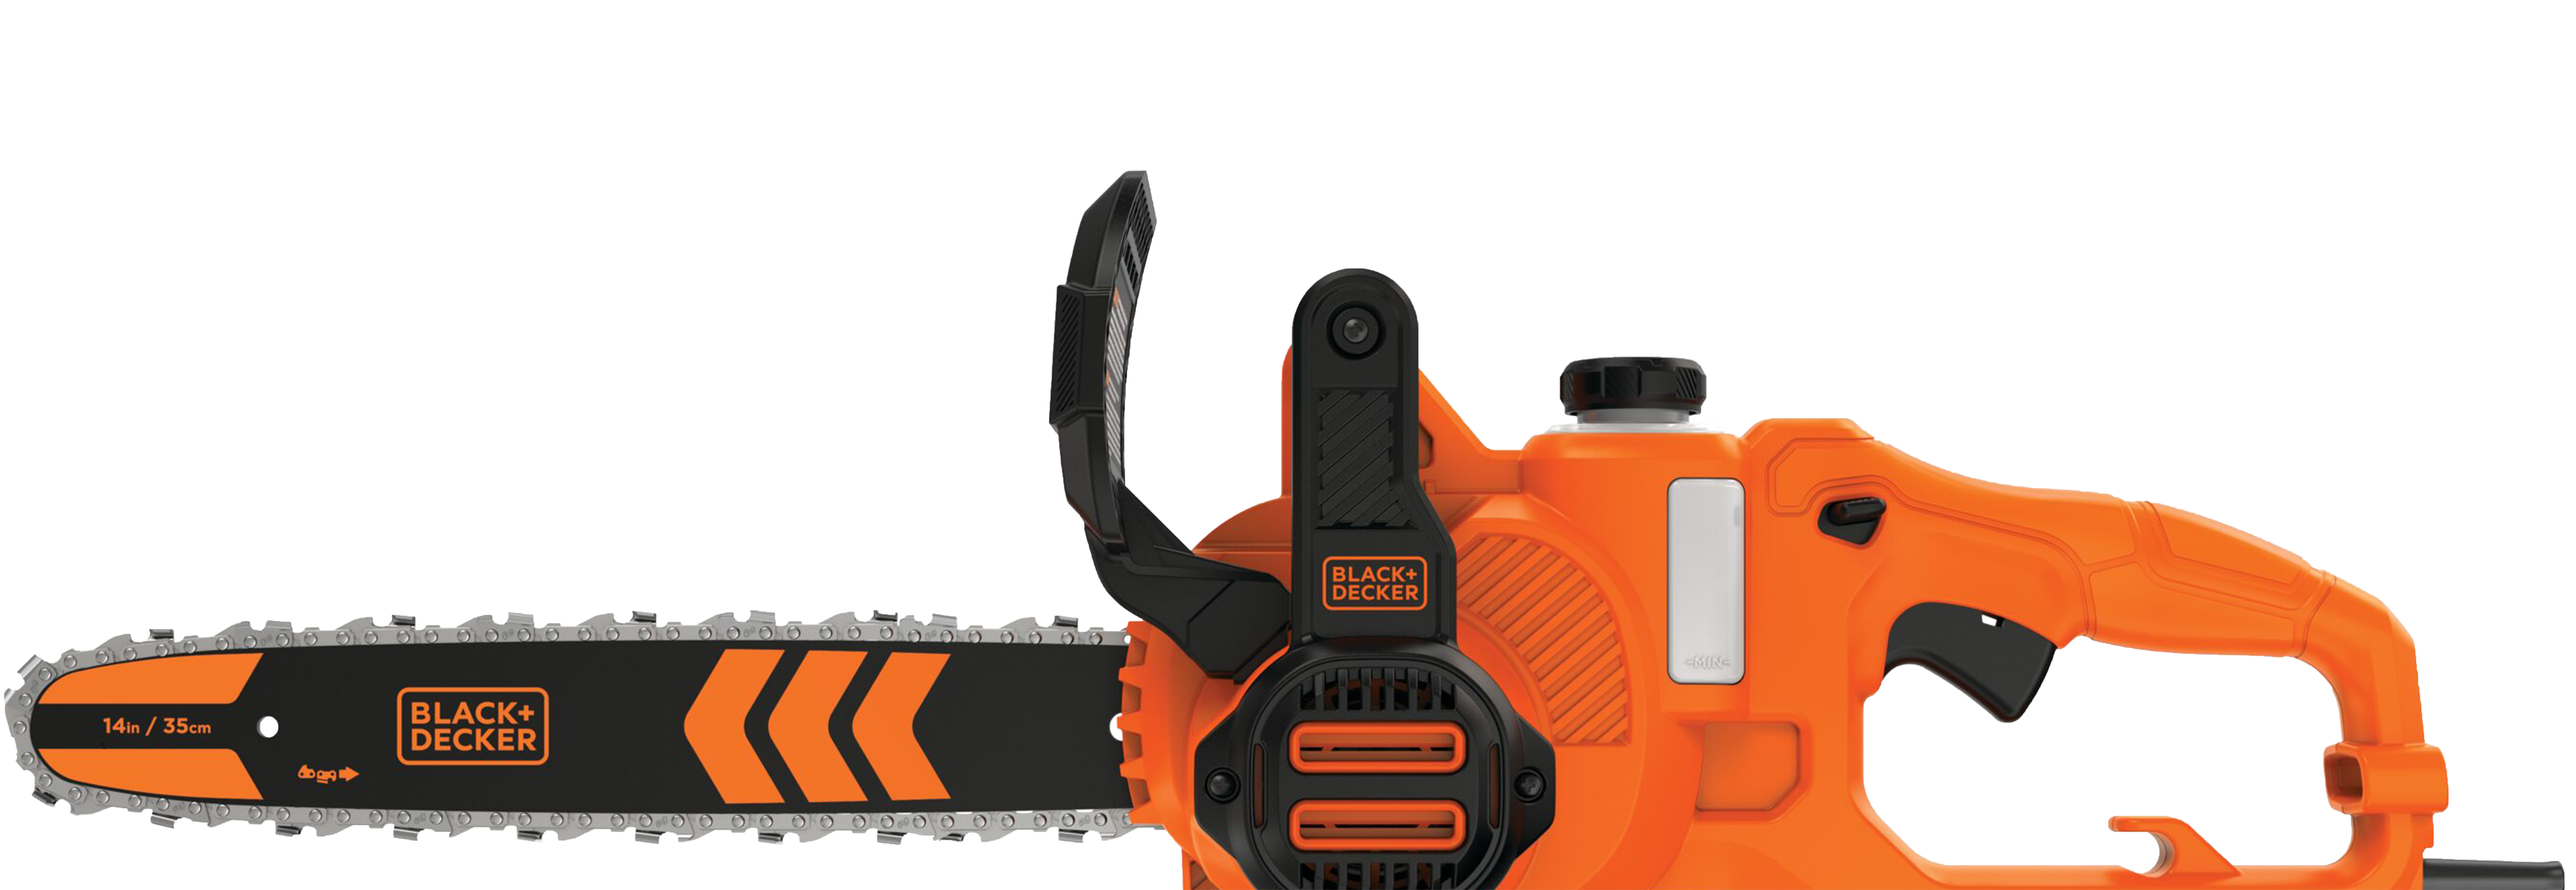 BLACK+DECKER 14 in. 8 Amp Electric Chain Saw for Sale in Houston